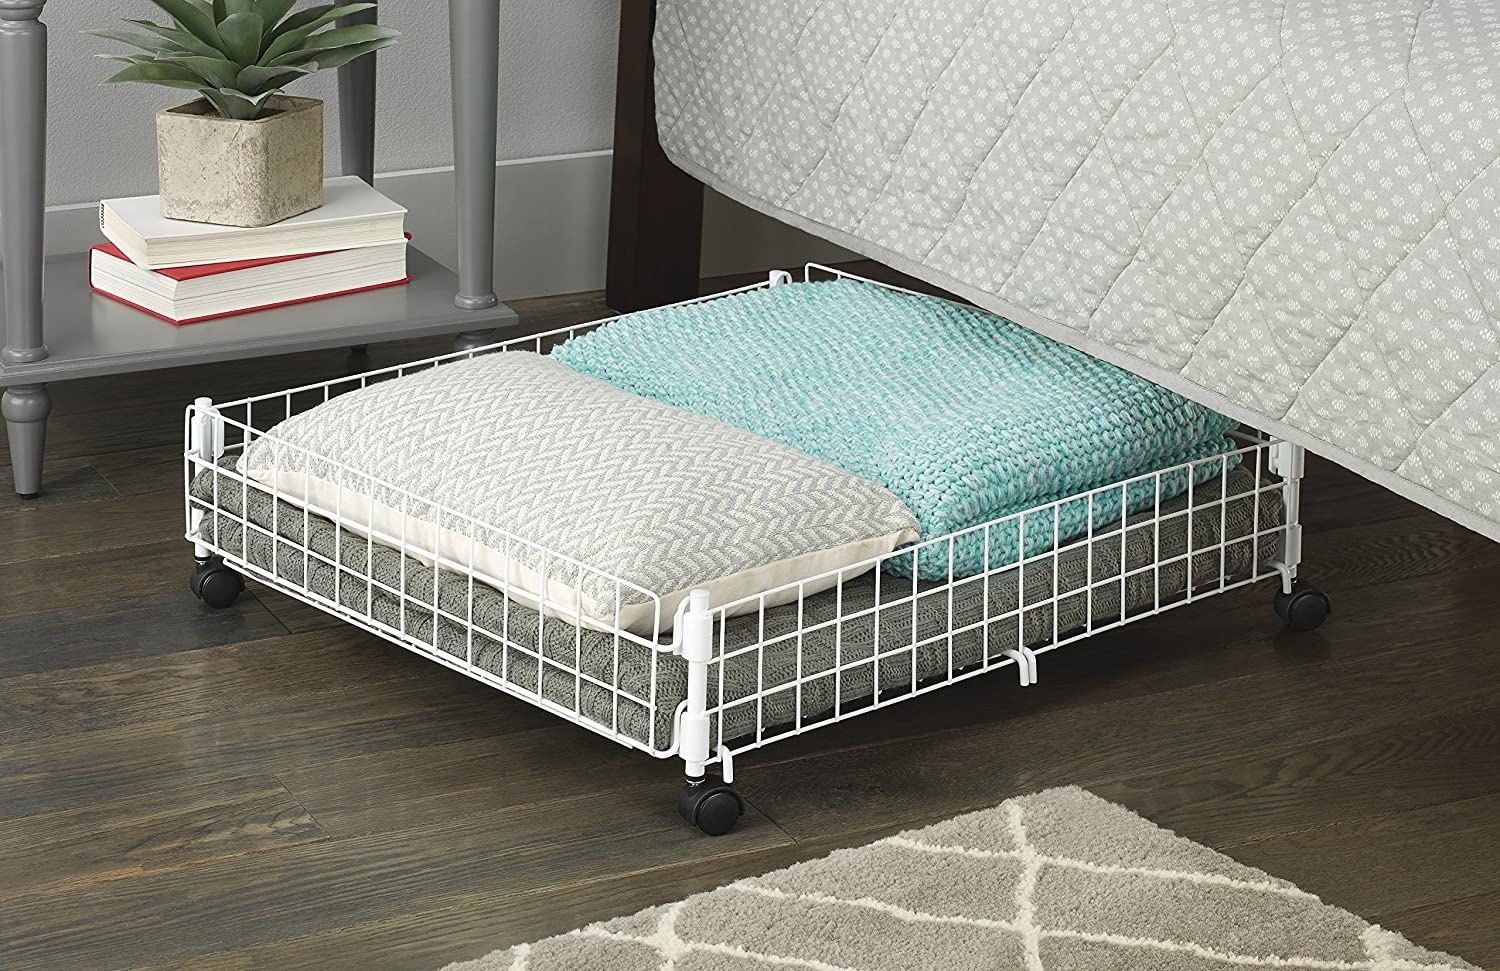 A wiry square basket on wheels peaking out from beneath a bed with pillows and blankets inside